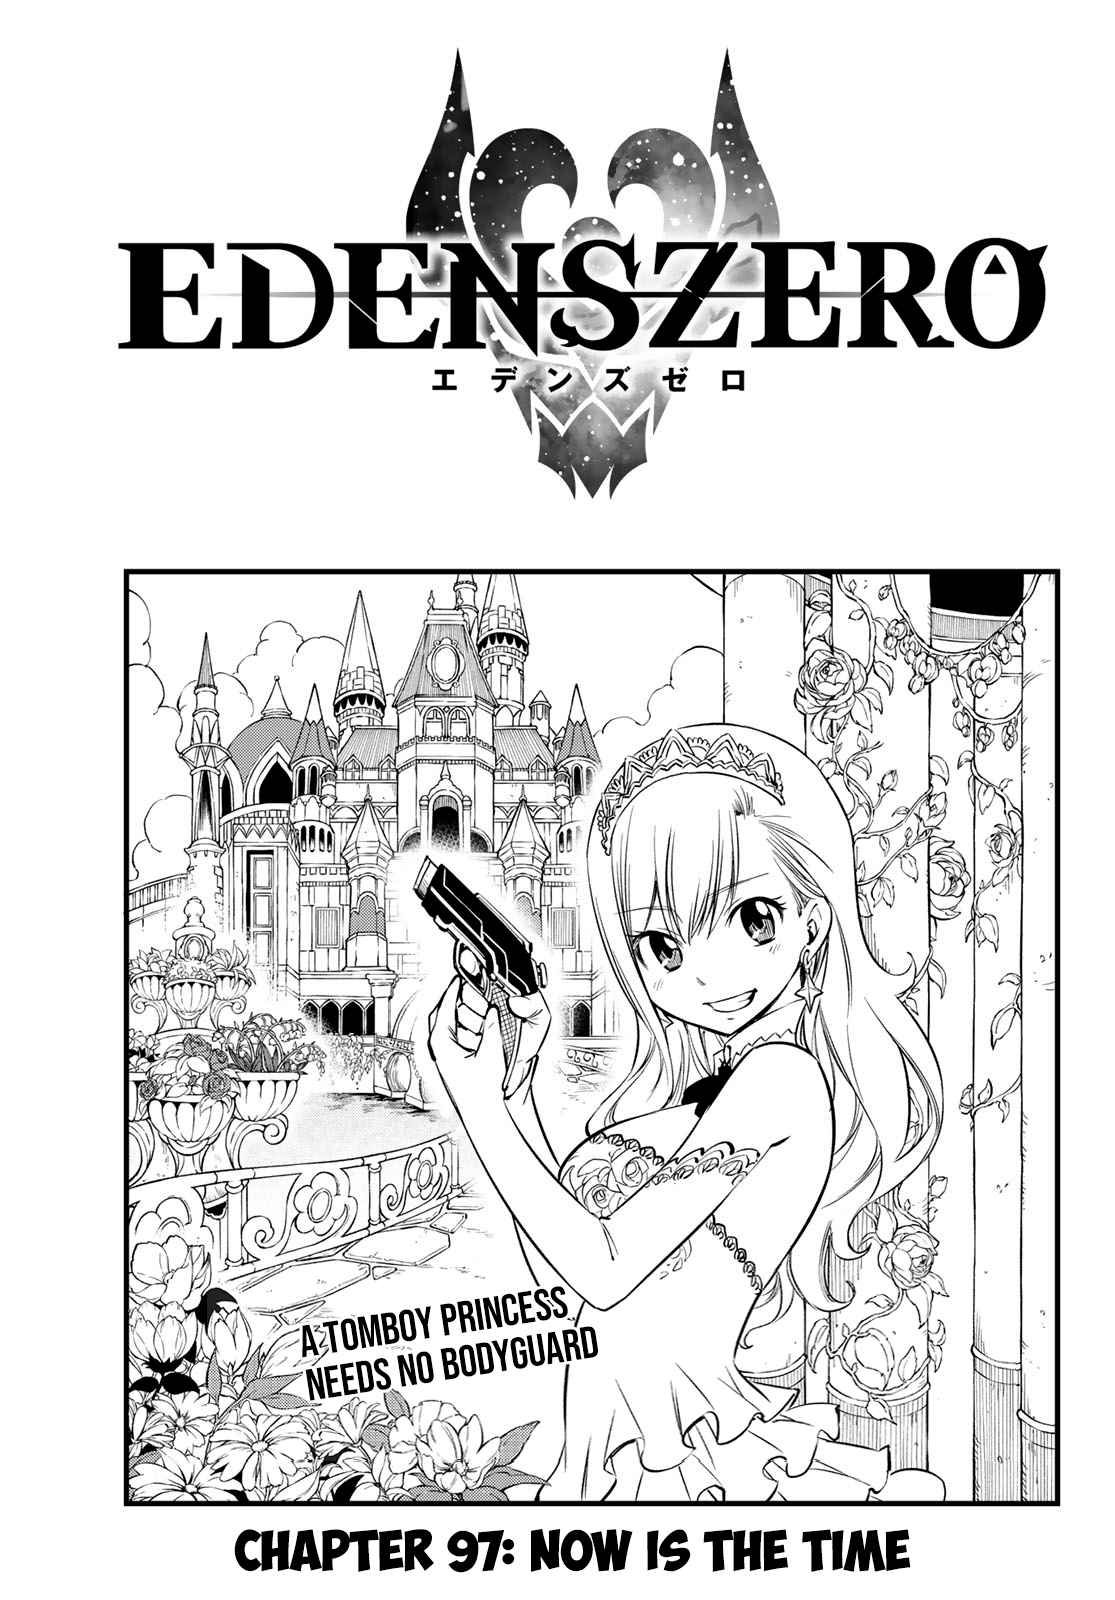 Edens Zero Ch. 97 Now is the Time